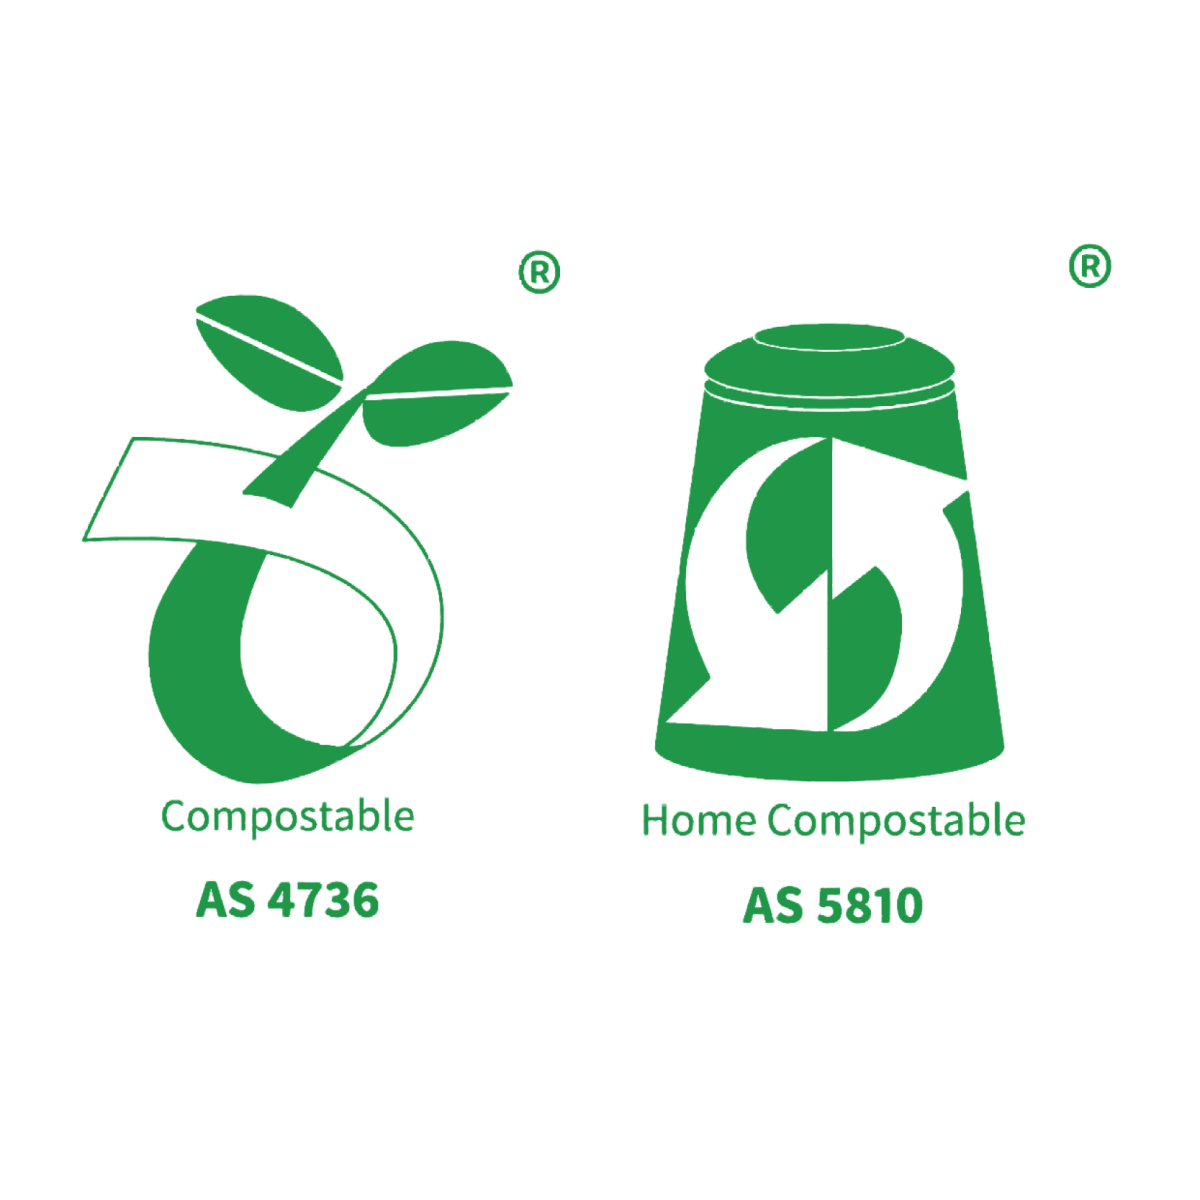 image of certification symbols for compostable liners